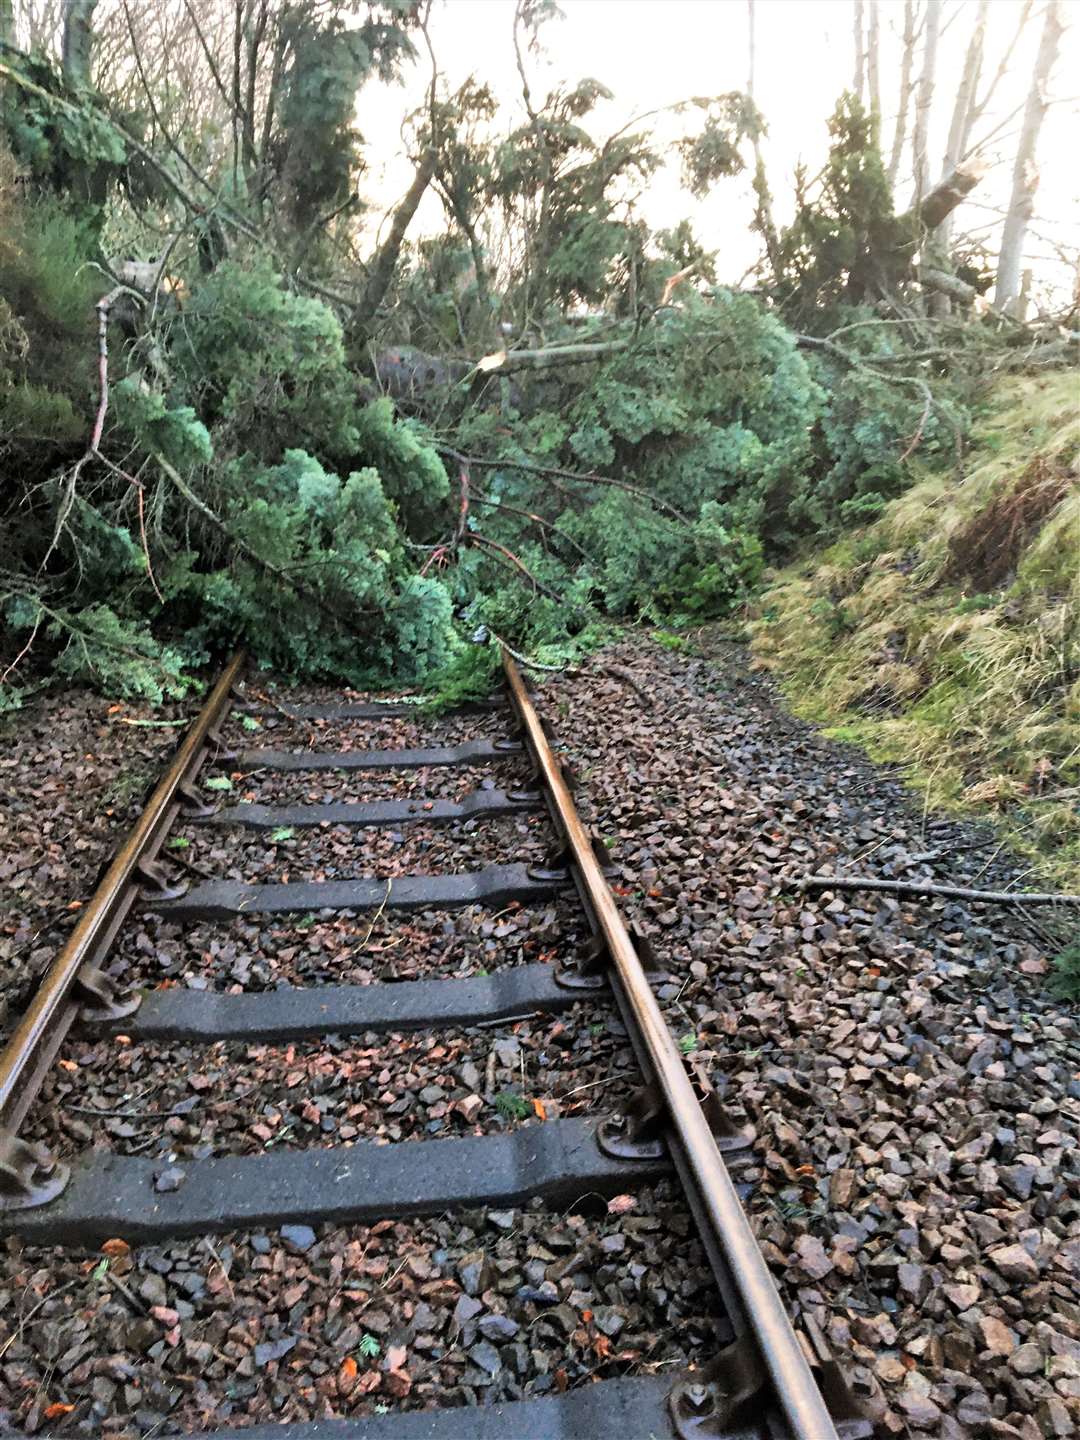 Image posted on Twitter by Scotrail showing trees felled on the far north line near Evanton.